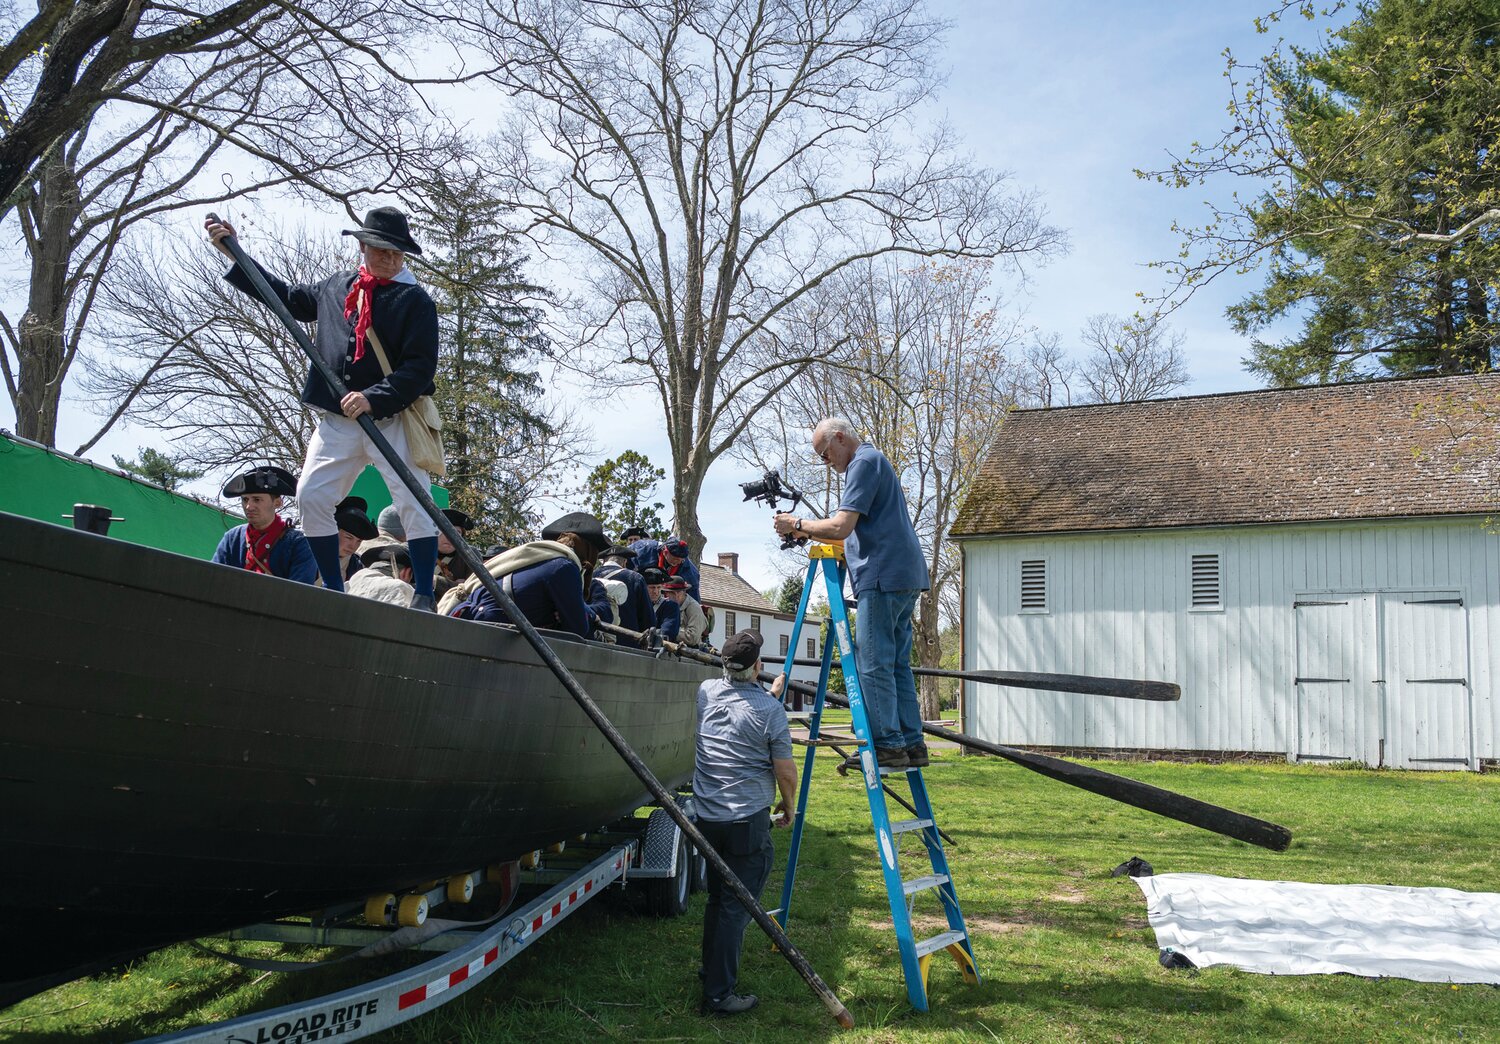 Ralf W. Augstroze climbs a ladder and eyes the action on the Durham boat during a recent shoot at Washington Crossing Historic Park.